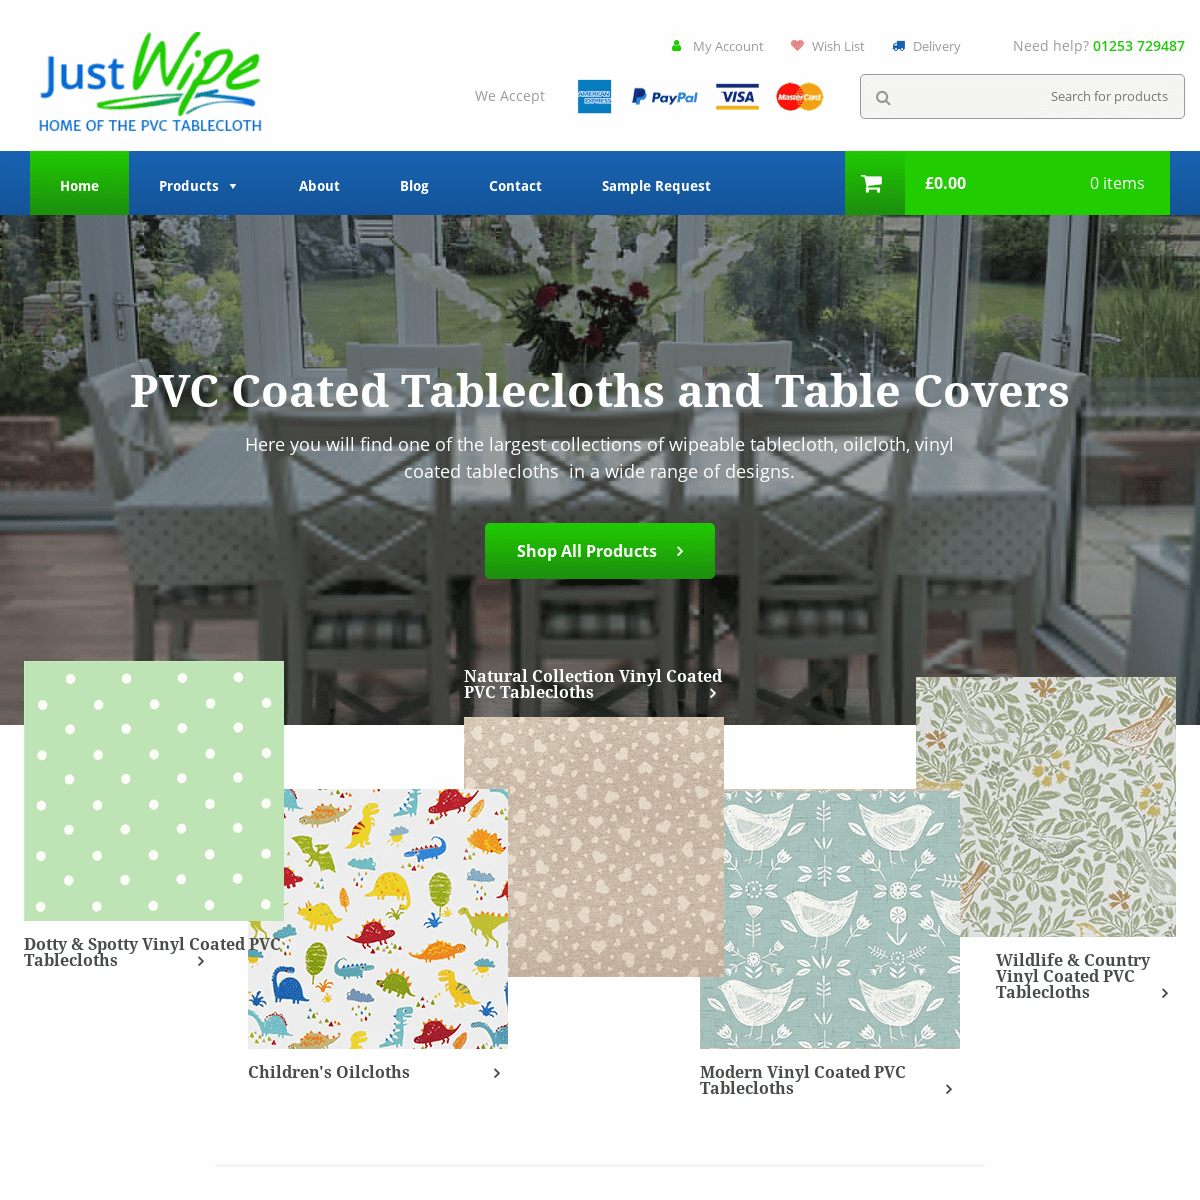 PVC Coated Tablecloths, Oilcloths & Table Covers | Just Wipe